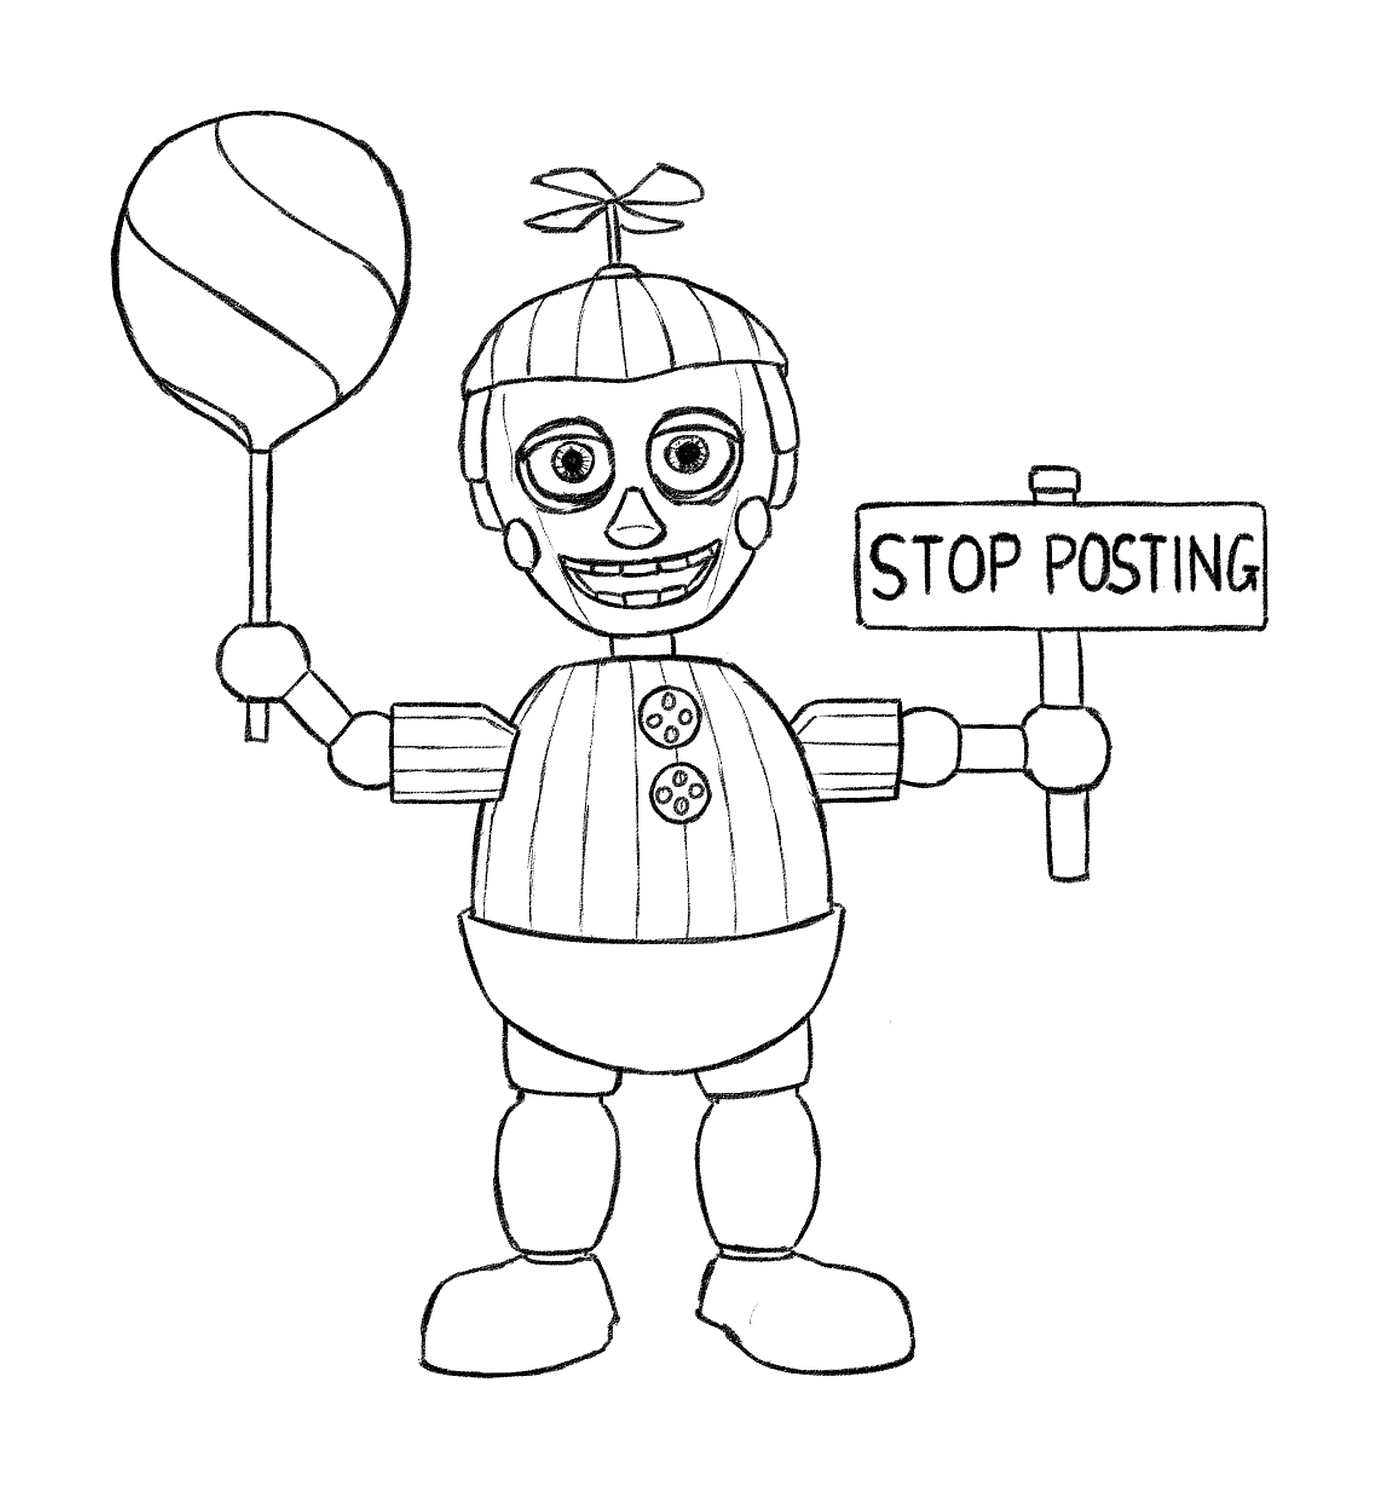  A toy character holding a ball 